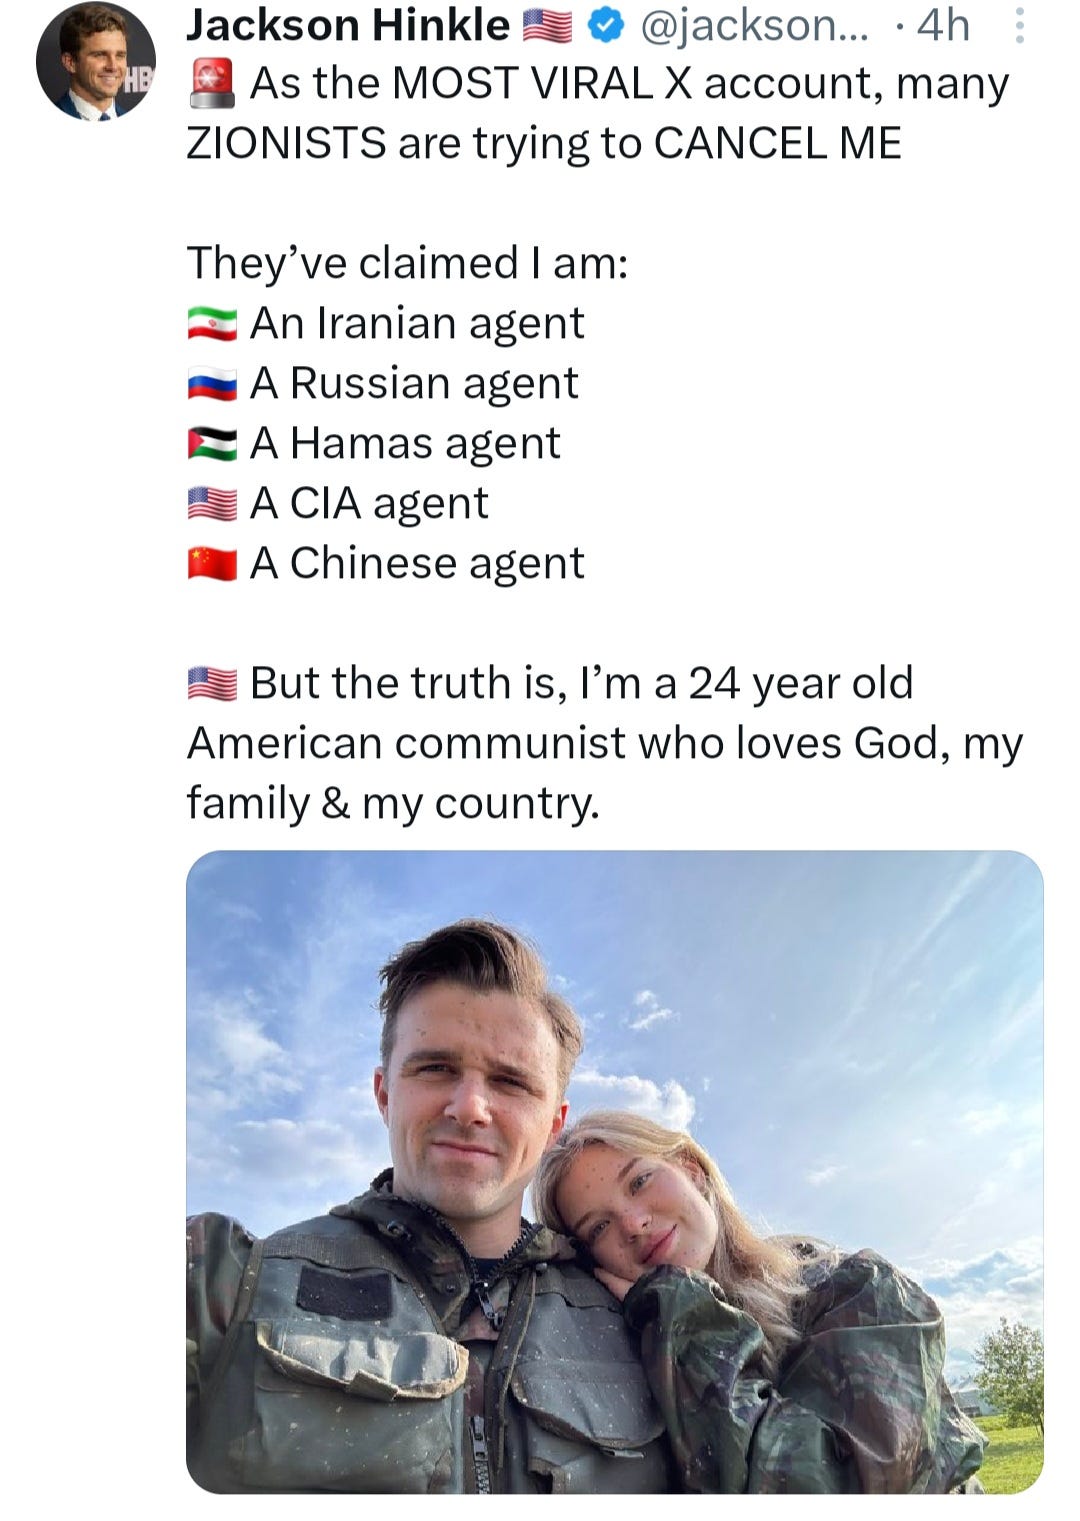 Jackson Hinkle tweeted As the most viral X account, many Zionists are trying to cancel me. They've claimed I am an Iranian agent, a Russian agent, a Hamas agent, a CIA agent, a Chinese agent. But the truth is, I'm a 24 year old American communist who loves god, my family, and my country. Hinkle's tweet includes a photograph of him and his fiancee, who is the winner of the 2022 Miss Russia beauty contest.